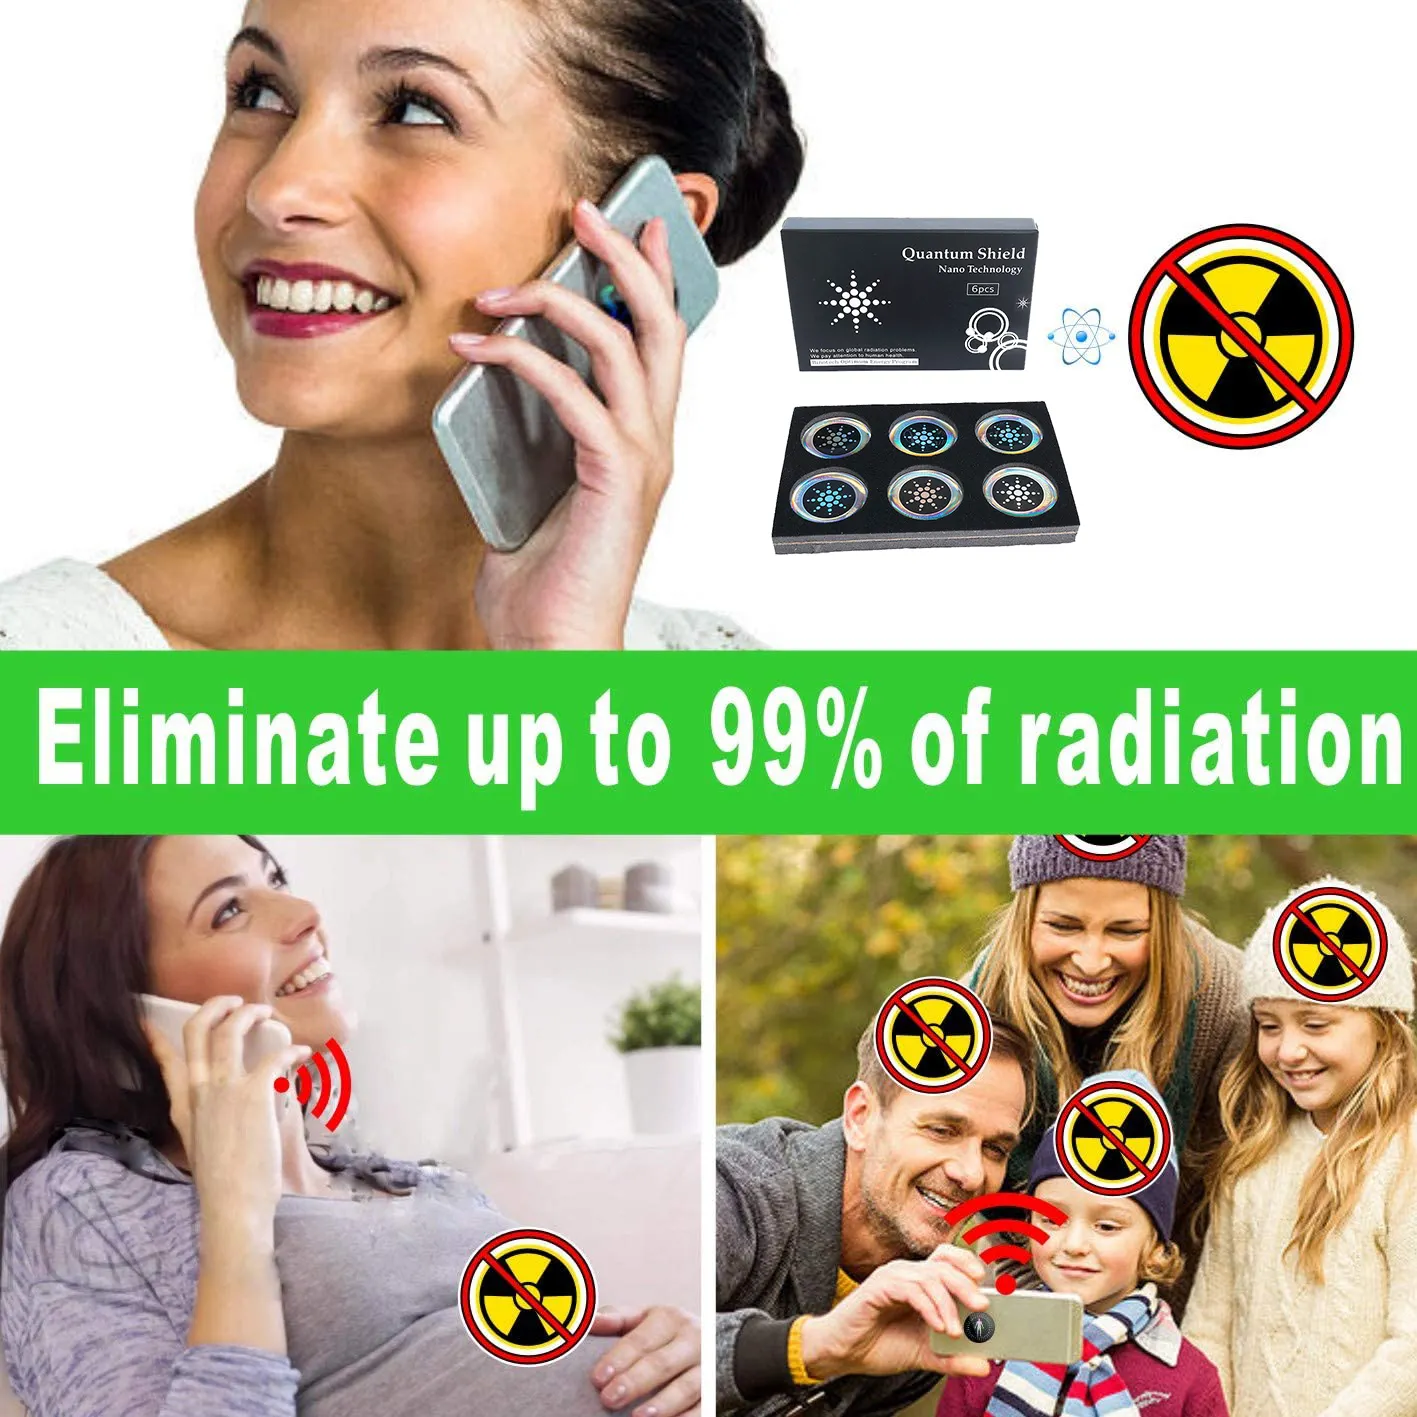 6 Pcs/Pack EMF Protection Quantum Shield Anti Radiation Sticker Laptop Cell Phone Mobile Sticker 5G EMF Protection